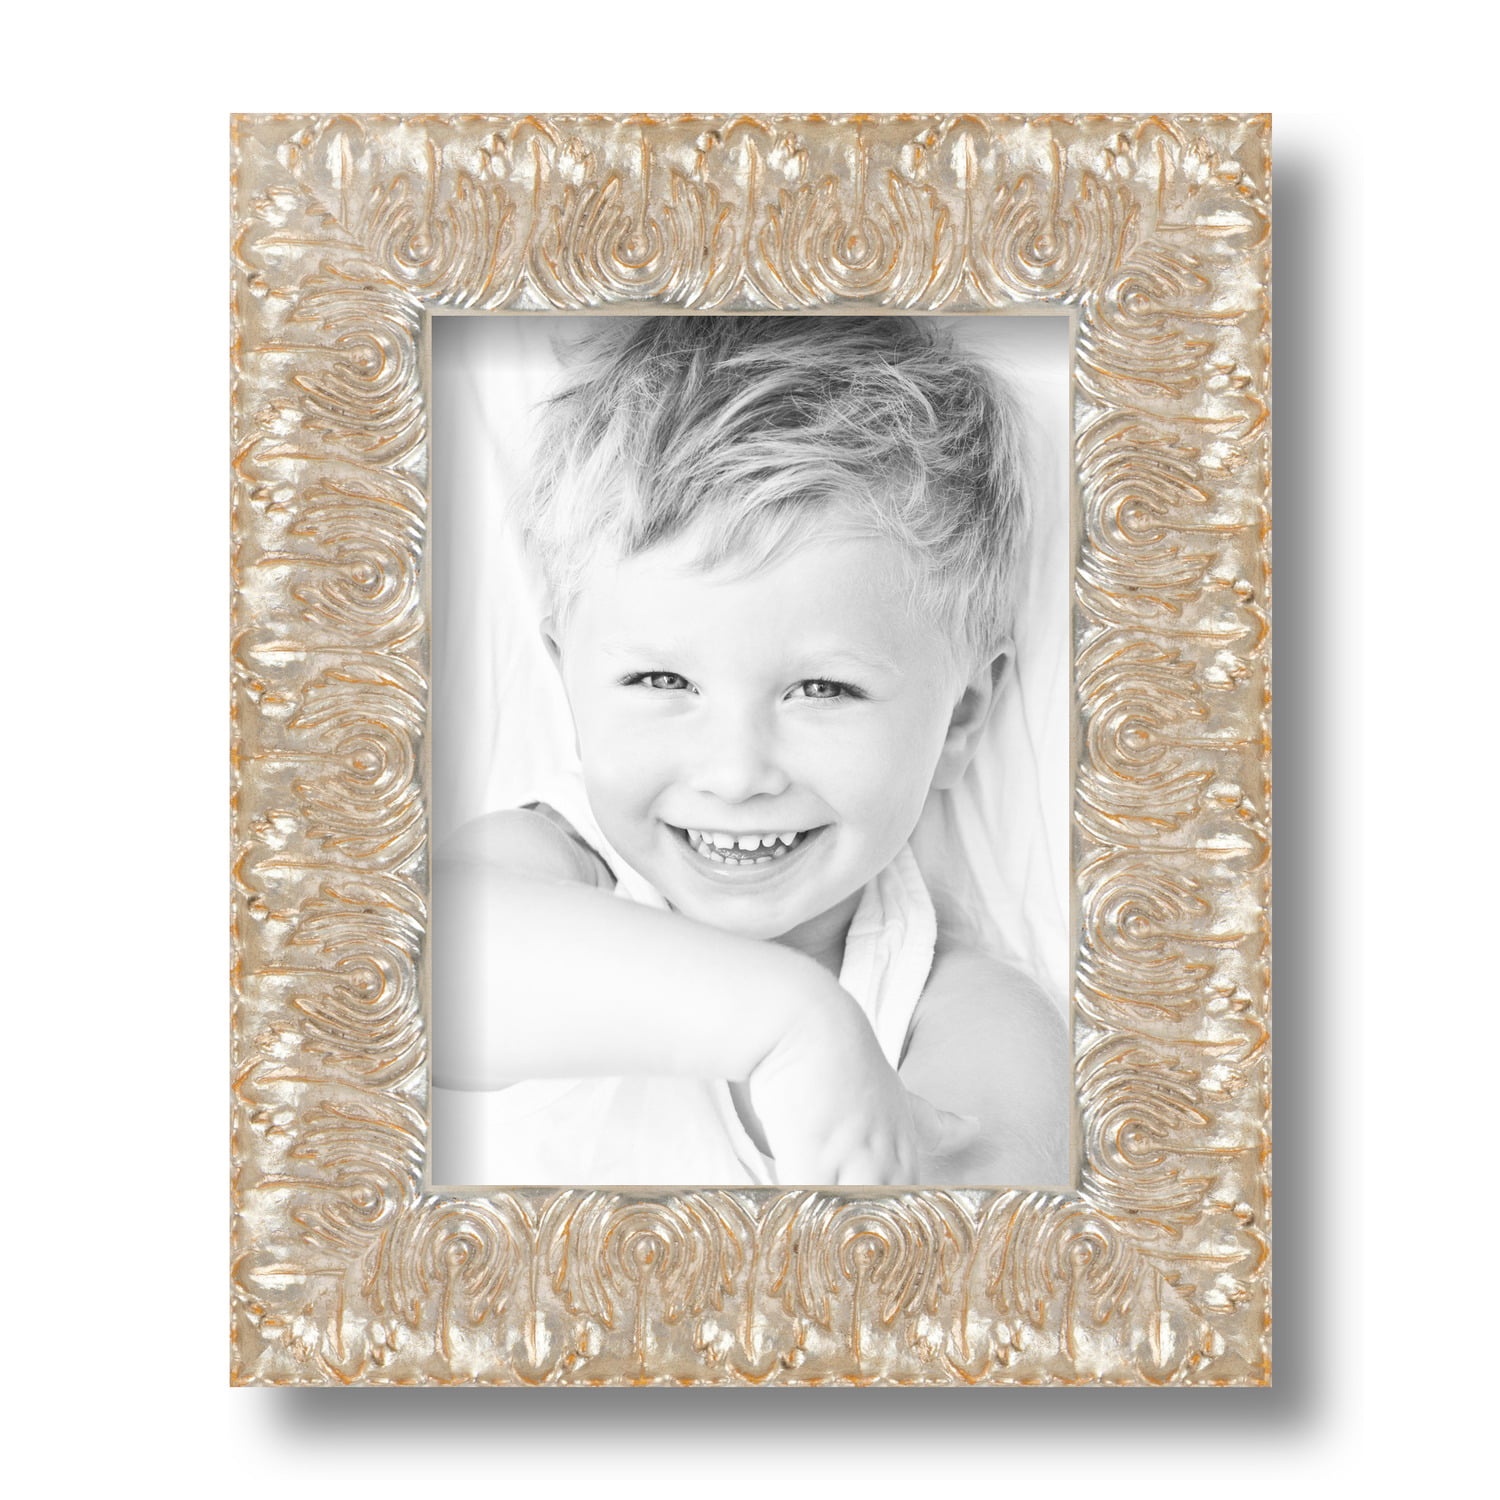 ArtToFrames 6"x8" Plexi Glass Replacement for Picture Frames 